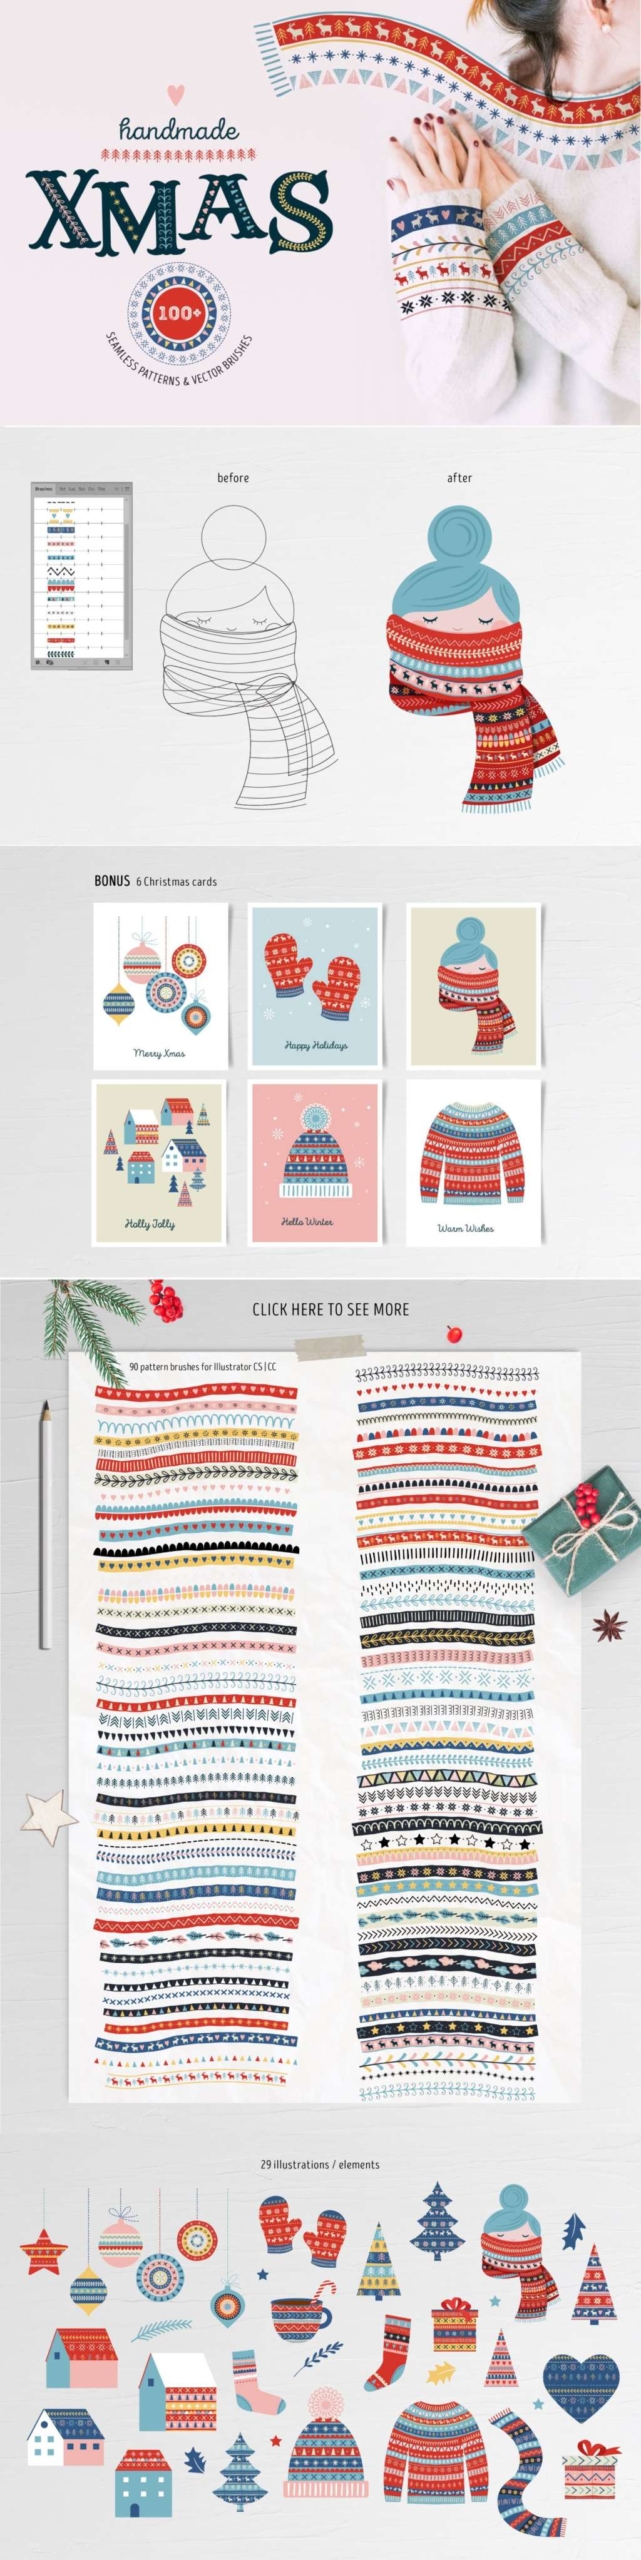 Handmade Xmas Brushes & Patterns Collection